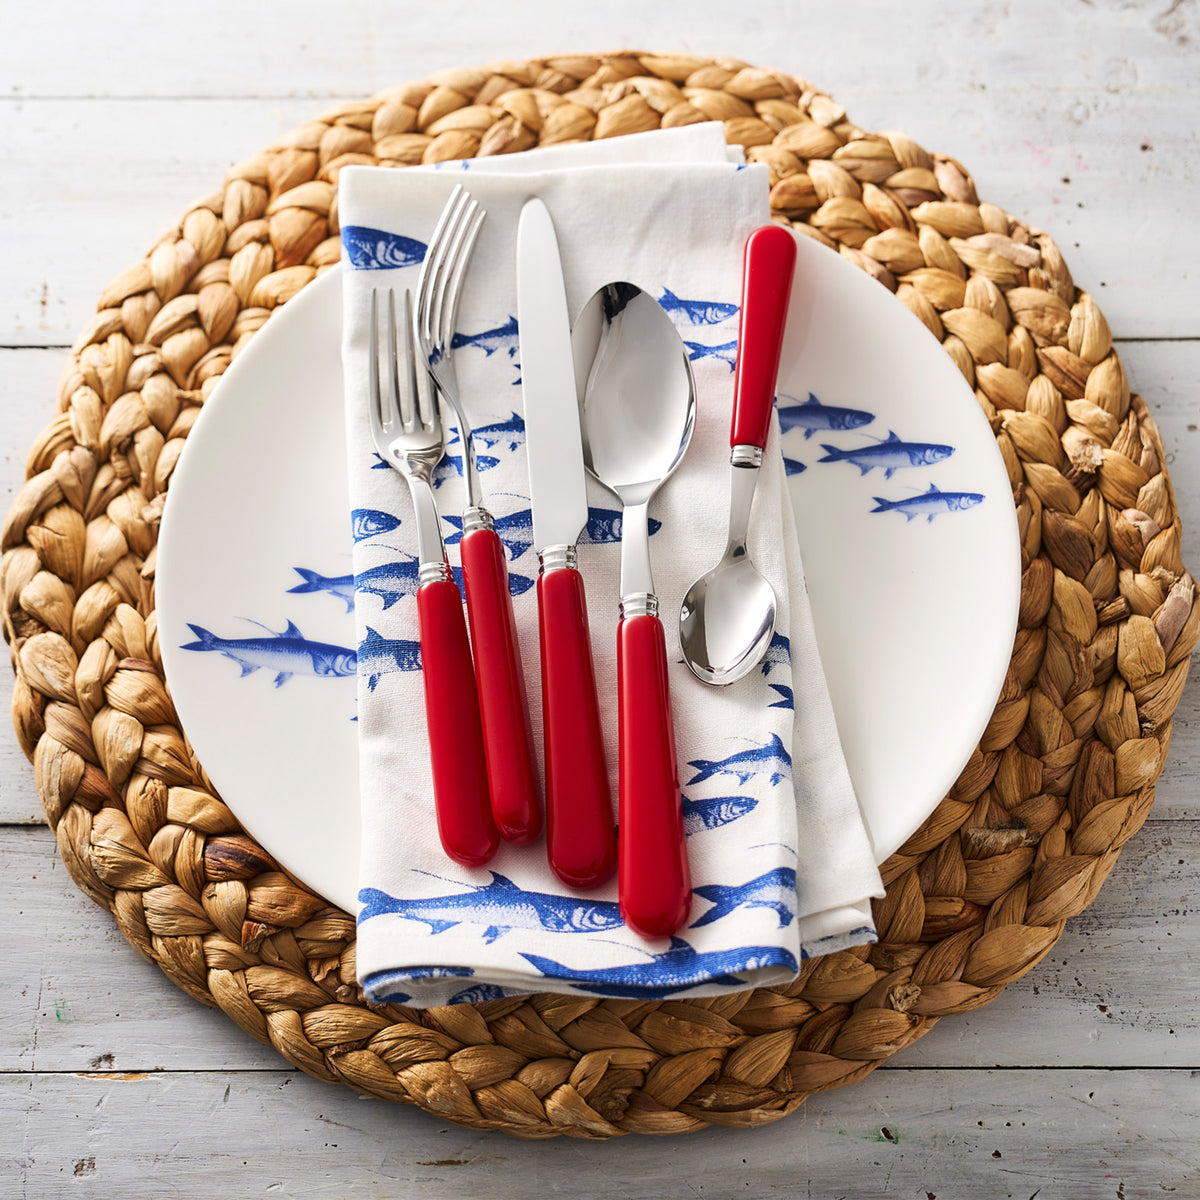 Caskata&#39;s porcelain School of Fish Dinner plate makes a perfect focal point for a fun coastal tabletop. The rustic table is adorned with a rattan placemat, School of Fish Dinner plate and coordinating napkin, and vibrant red handled flatware.